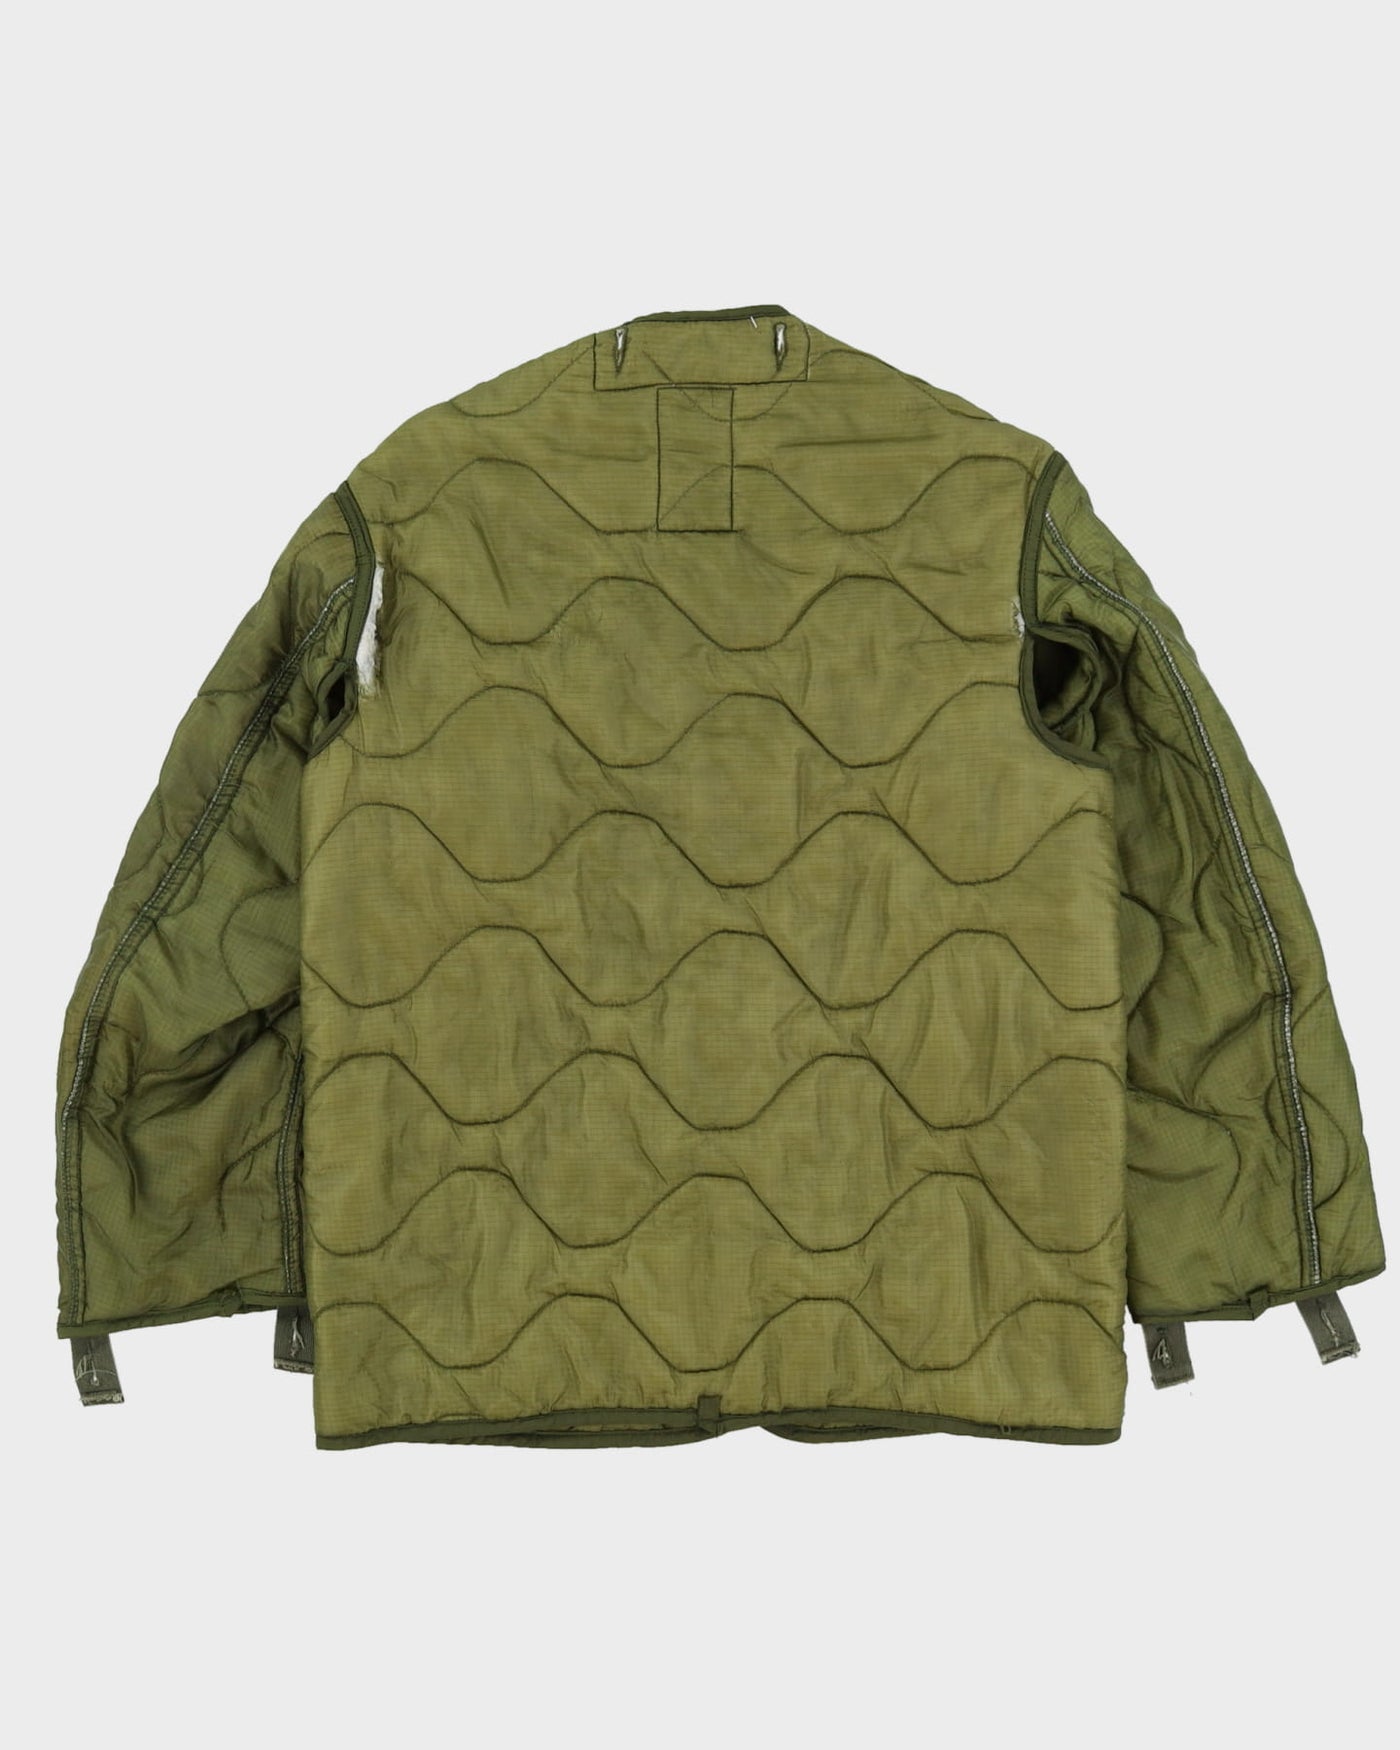 80s Vintage US Army M65 Field Jacket Quilted Liner - X-Small